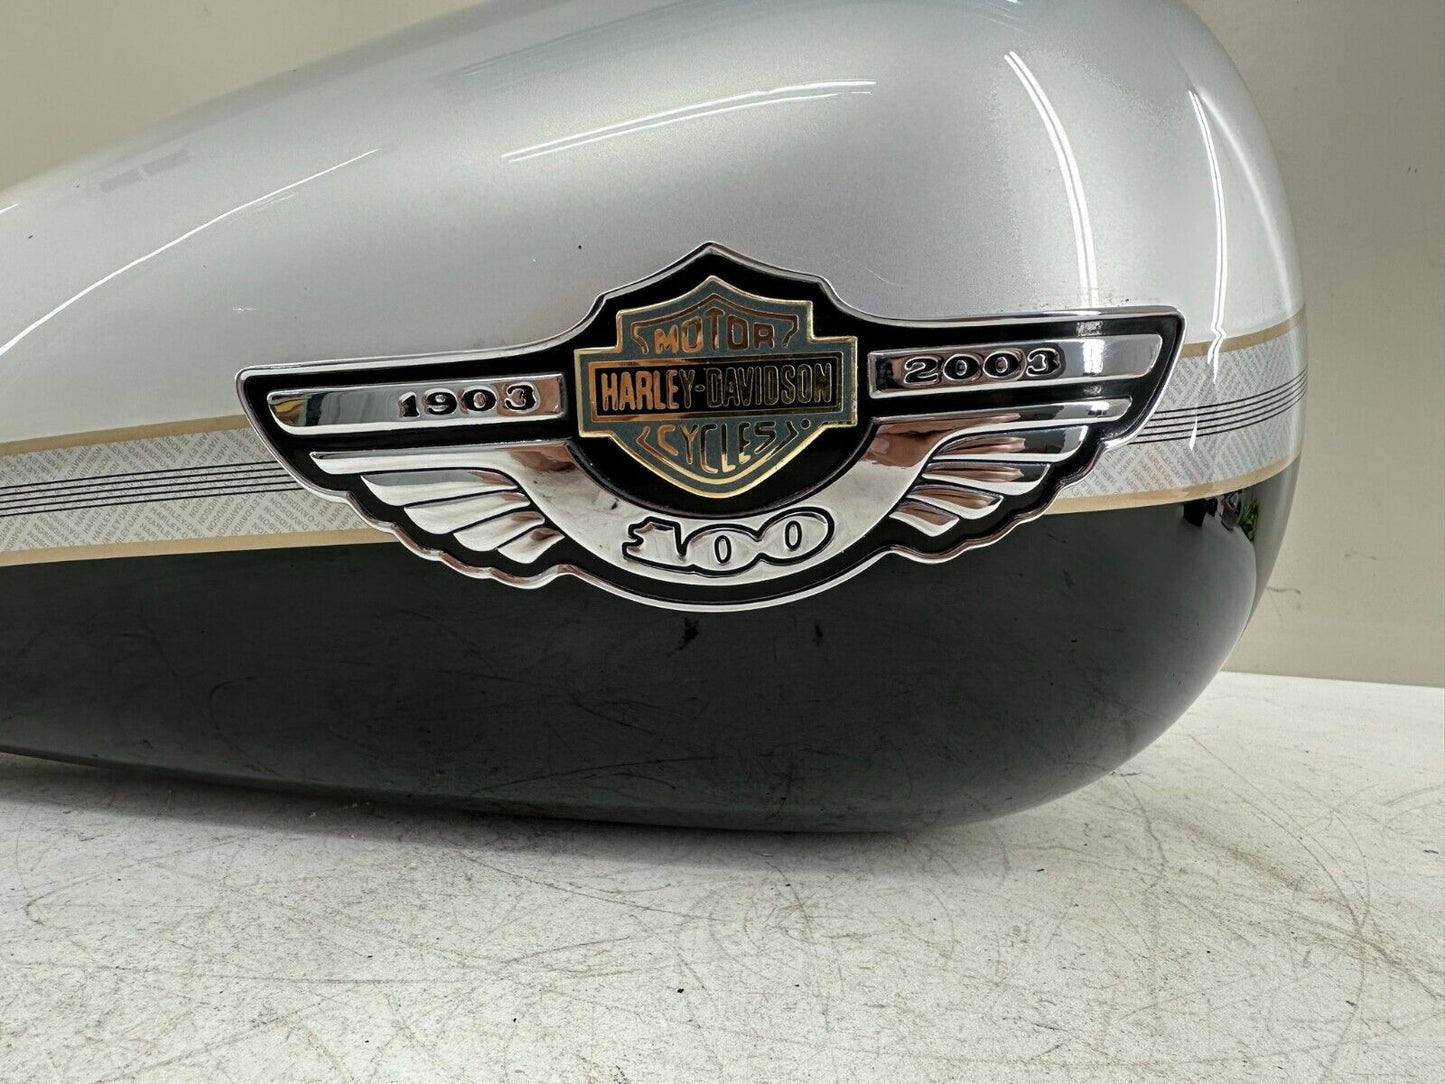 2003 HARLEY FLH ELECTRA GLIDE 100TH ANNIVERSARY PAINT GAS FUEL TANK w/ BADGES